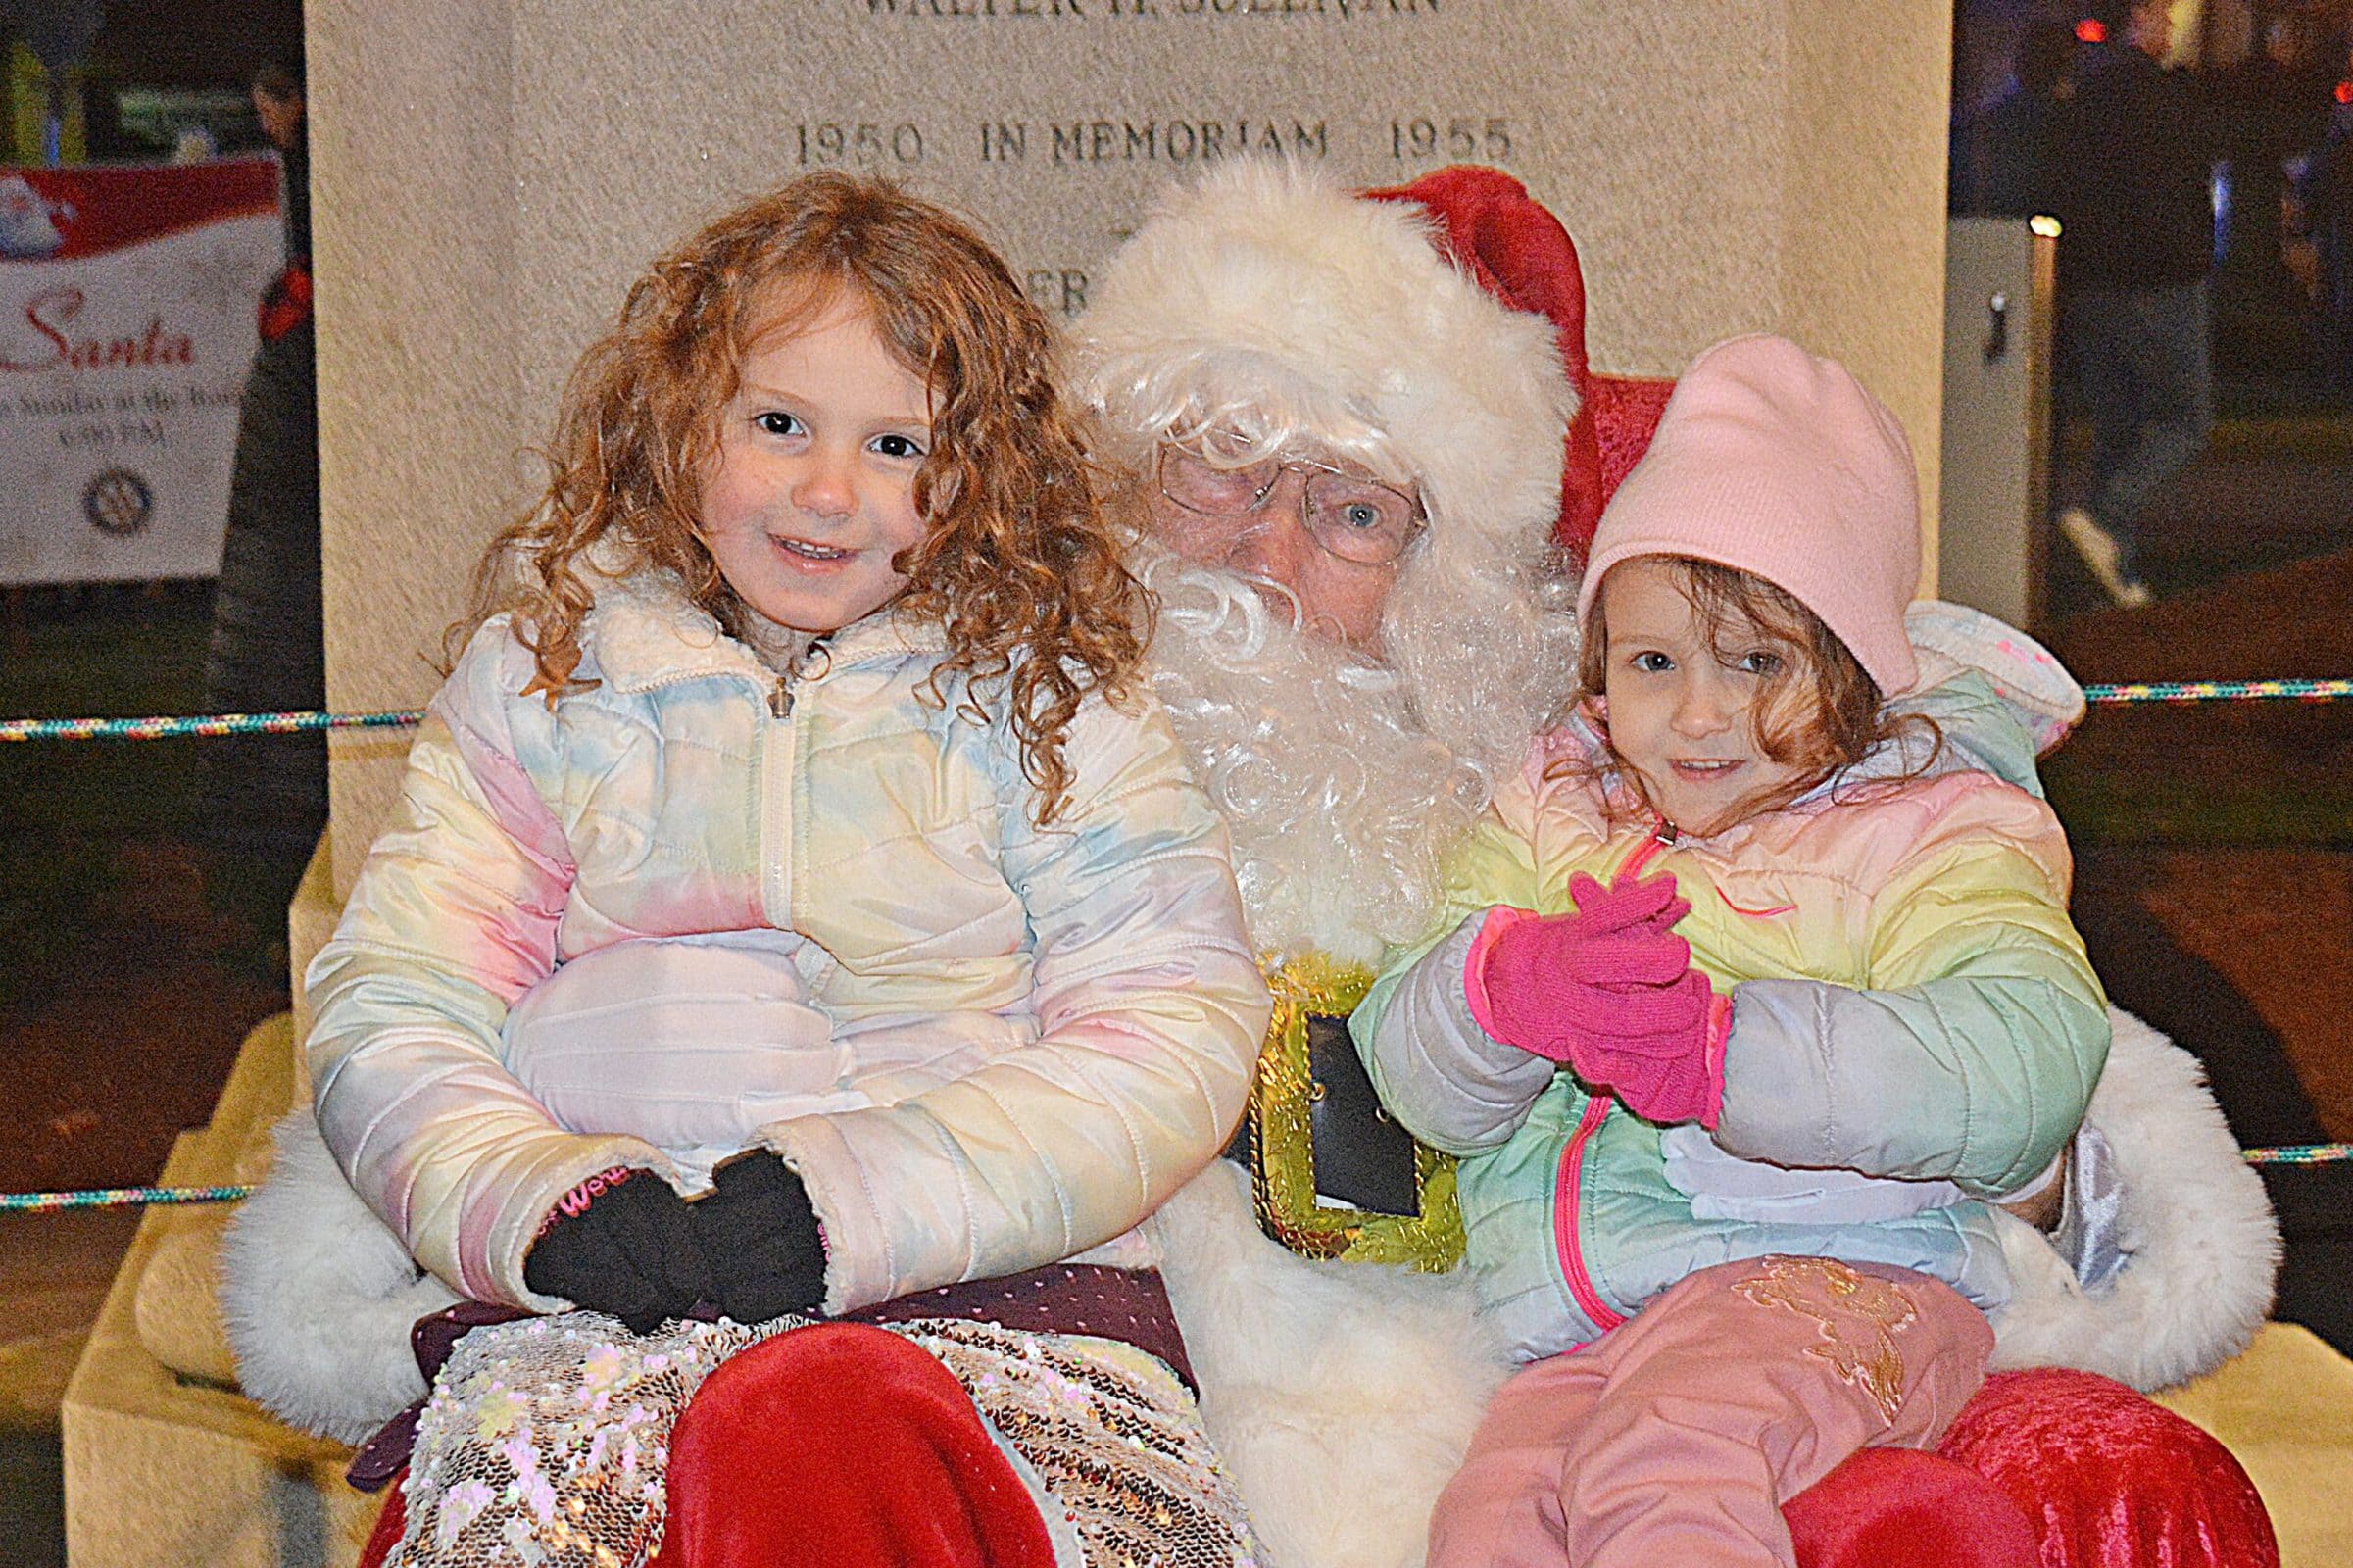 Westborough prepares for winter with stroll, parade, tree lighting